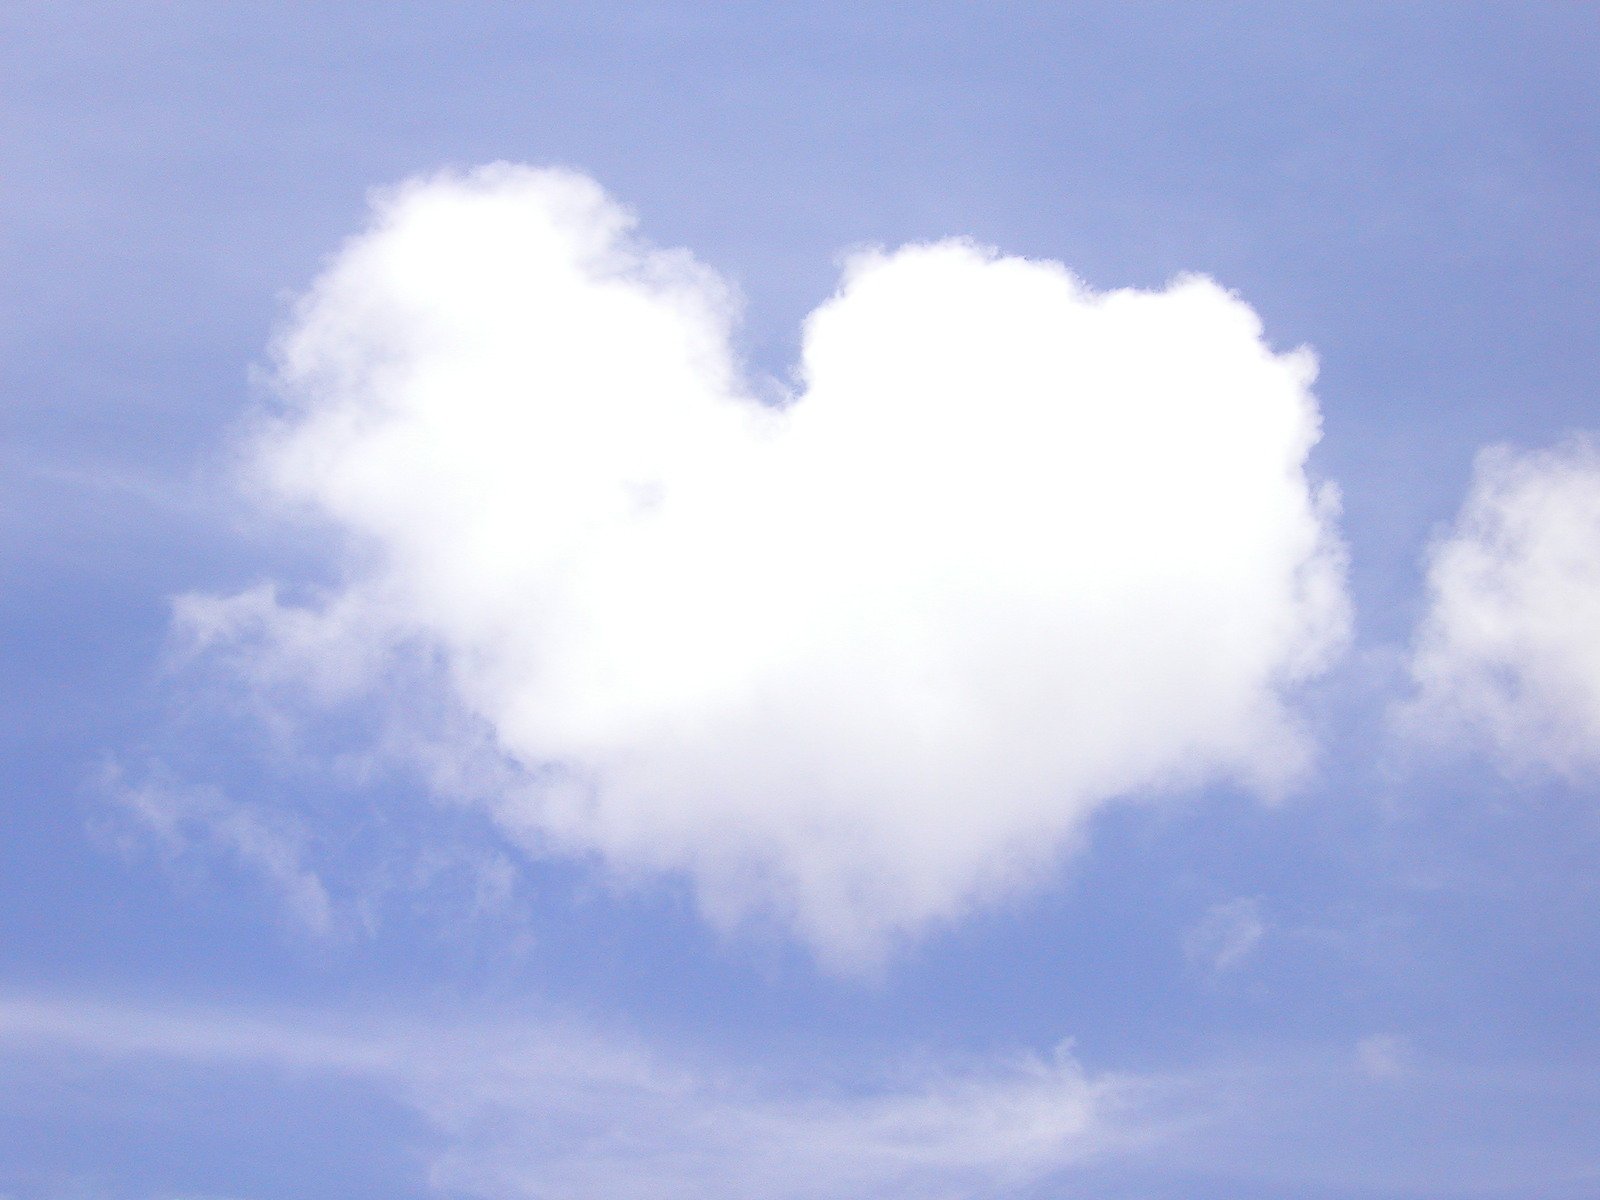 a airplane in flight with a heart shaped cloud